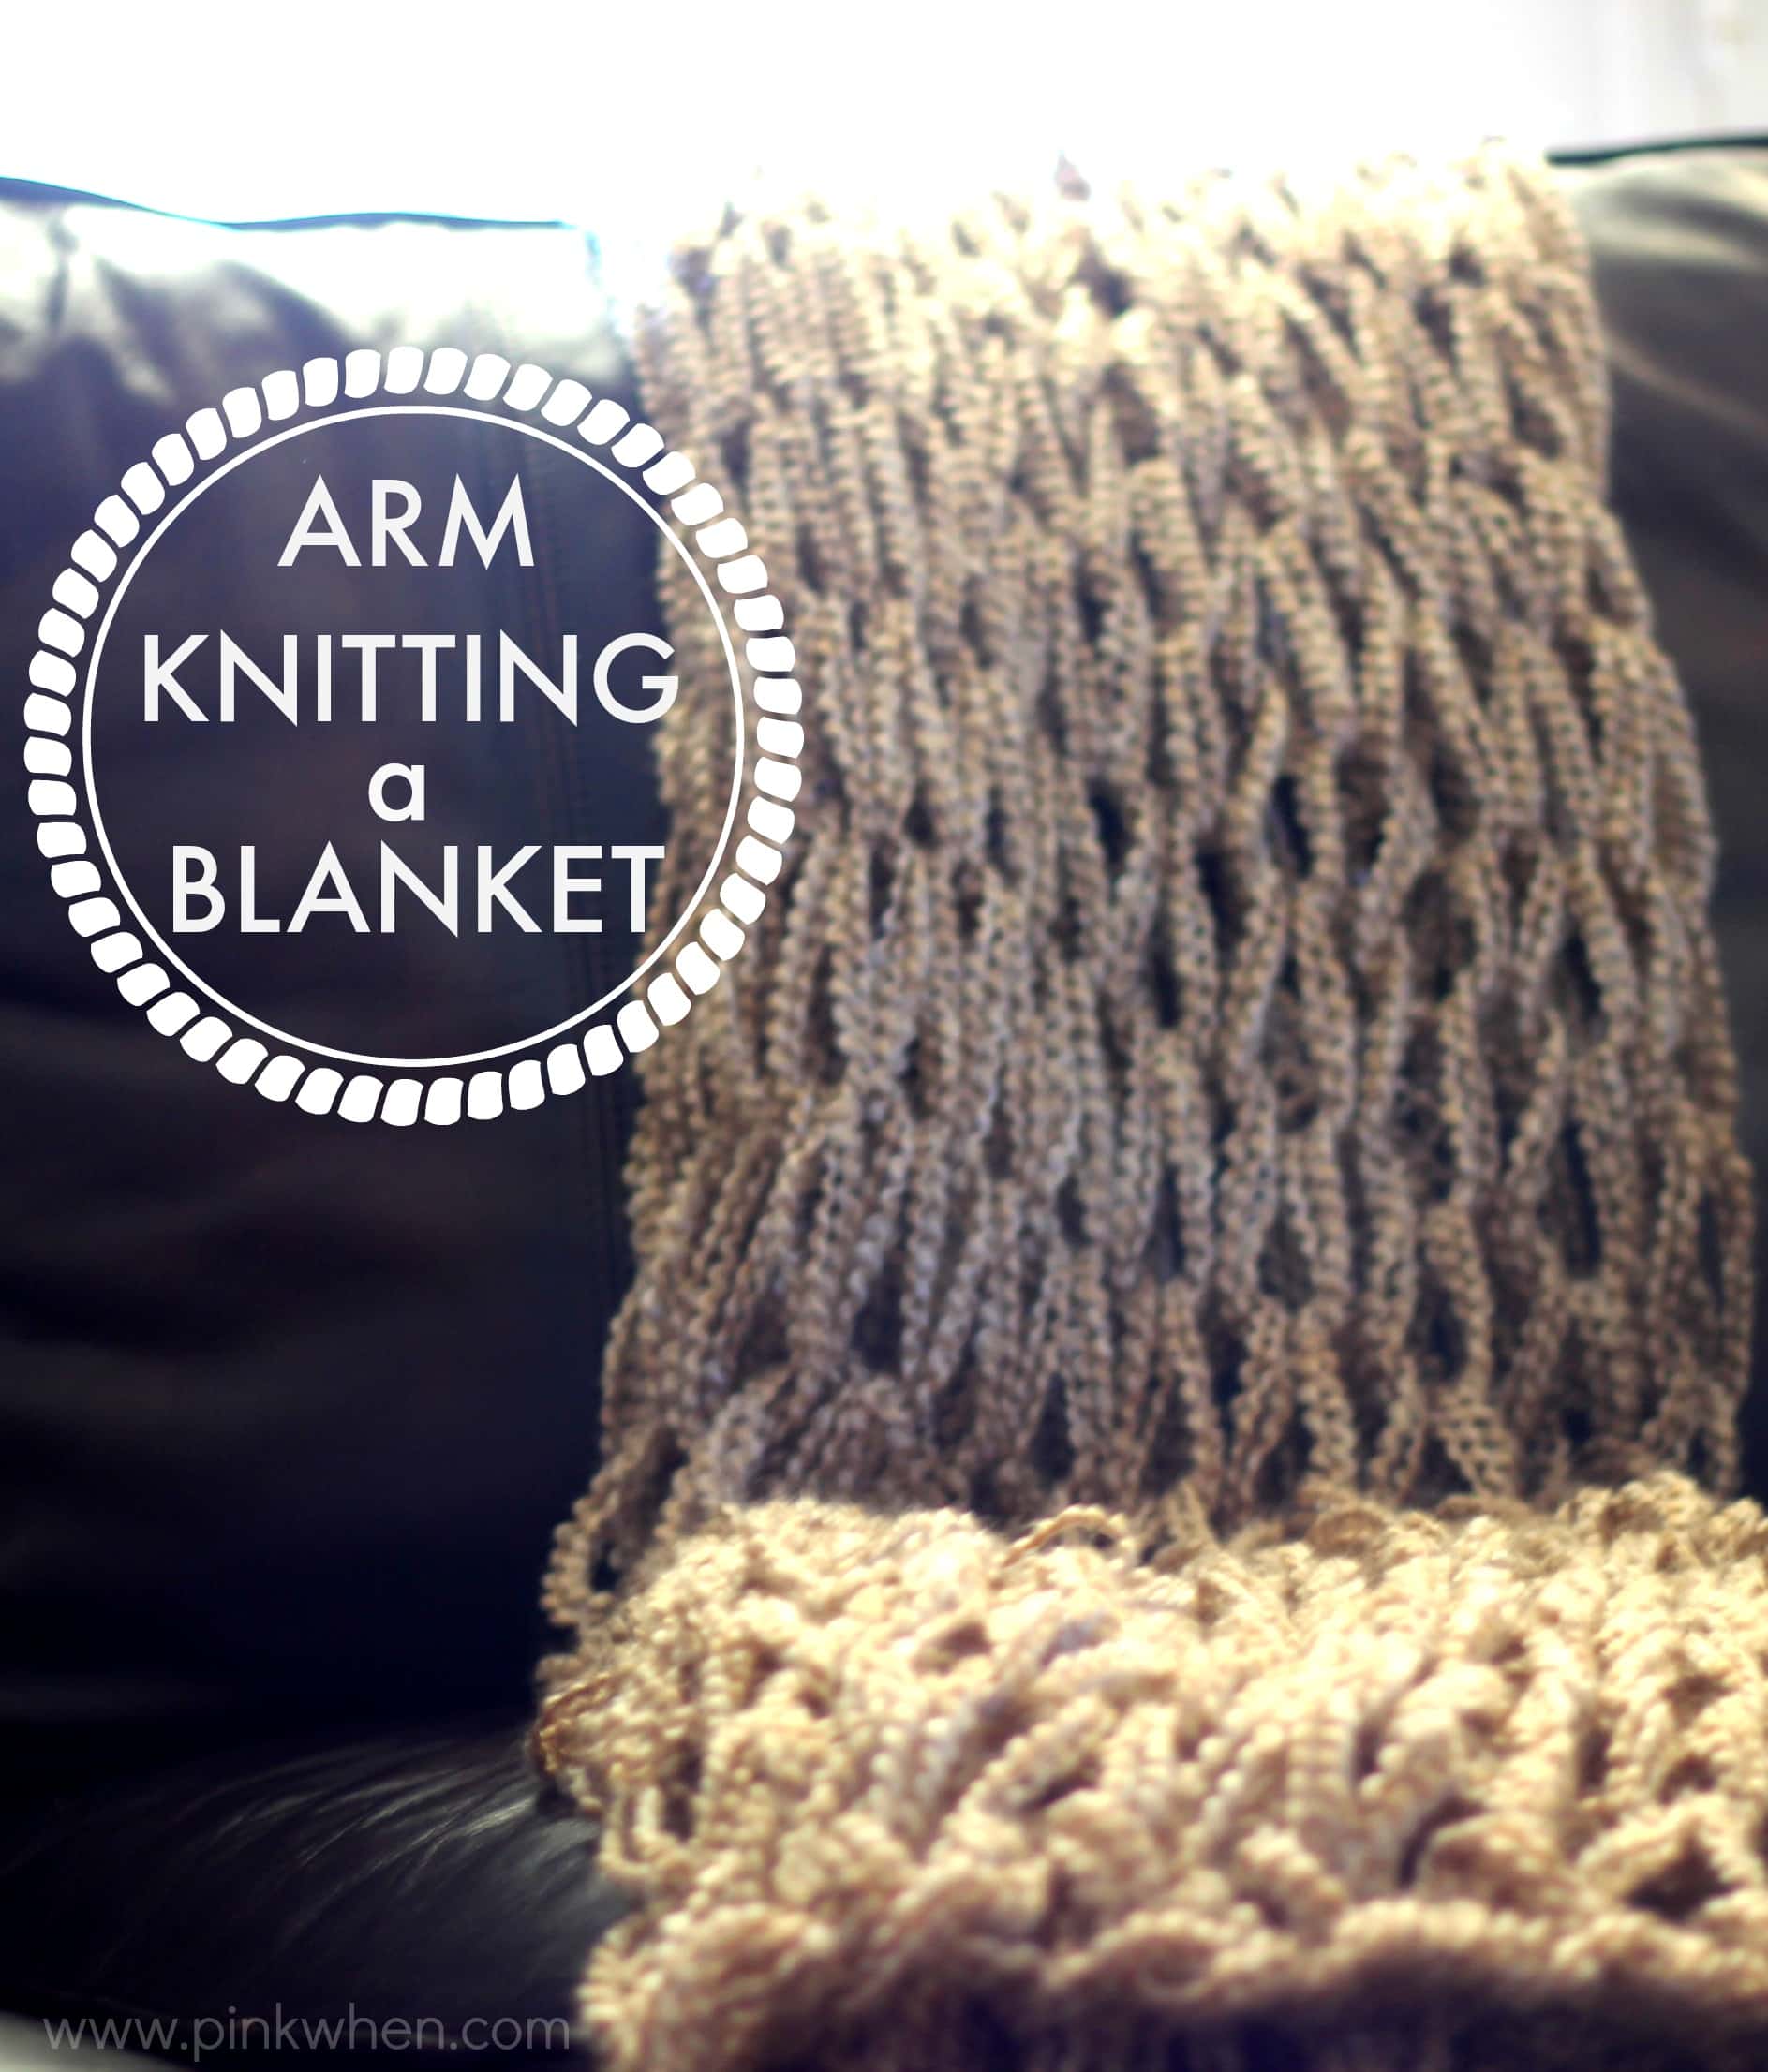 DIY ARM KNITTING A BLANKET - FULL TUTORIAL WITH VIDEO via PINKWHEN.COM